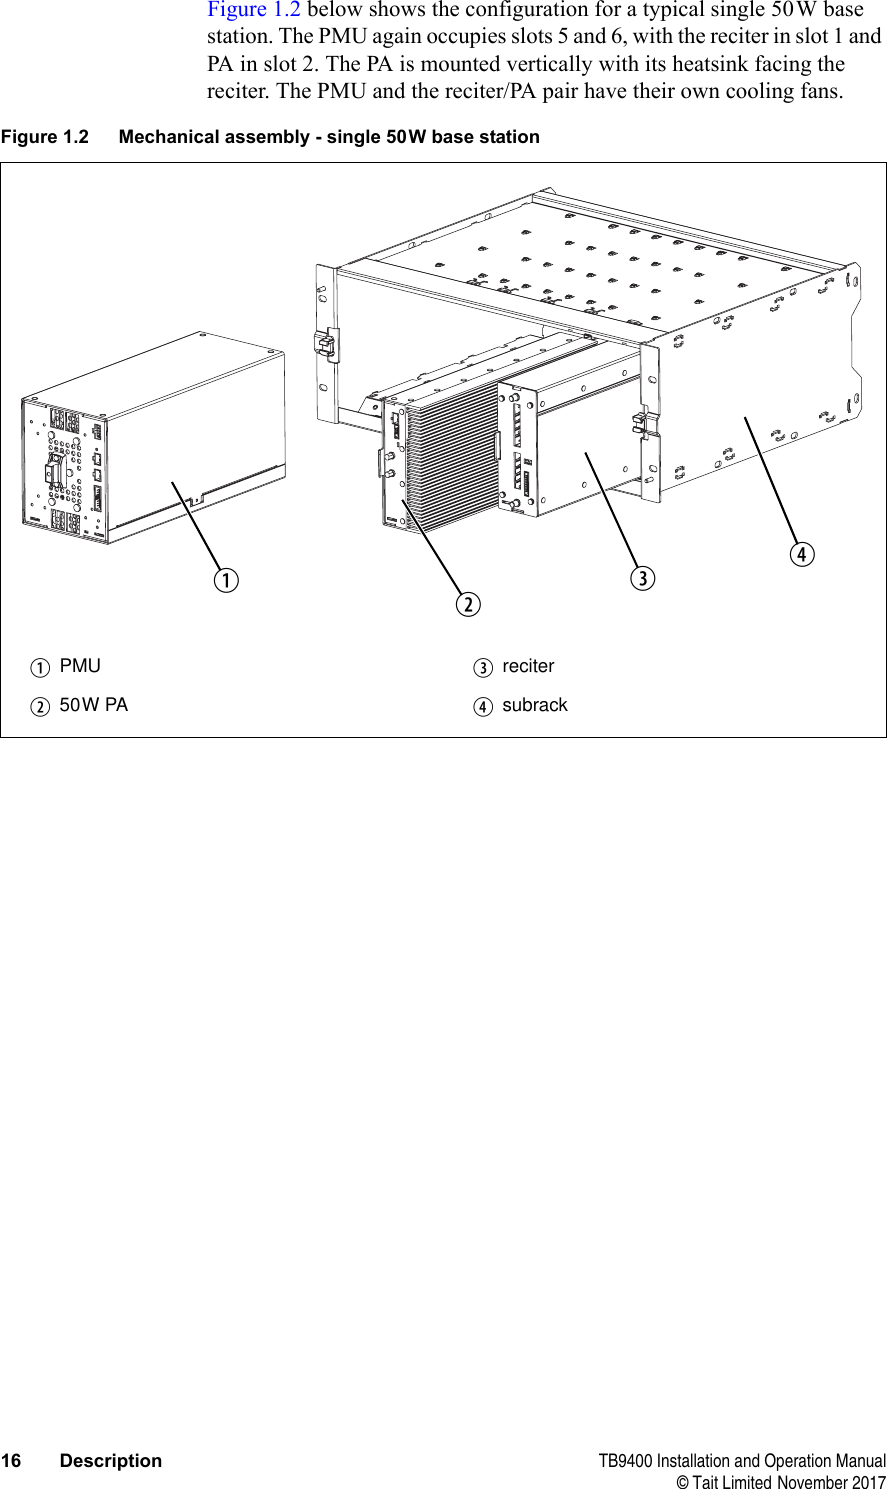  16 Description TB9400 Installation and Operation Manual© Tait Limited November 2017Figure 1.2 below shows the configuration for a typical single 50W base station. The PMU again occupies slots 5 and 6, with the reciter in slot 1 and PA in slot 2. The PA is mounted vertically with its heatsink facing the reciter. The PMU and the reciter/PA pair have their own cooling fans.Figure 1.2 Mechanical assembly - single 50W base stationbPMU dreciterc50W PA esubrackbcde